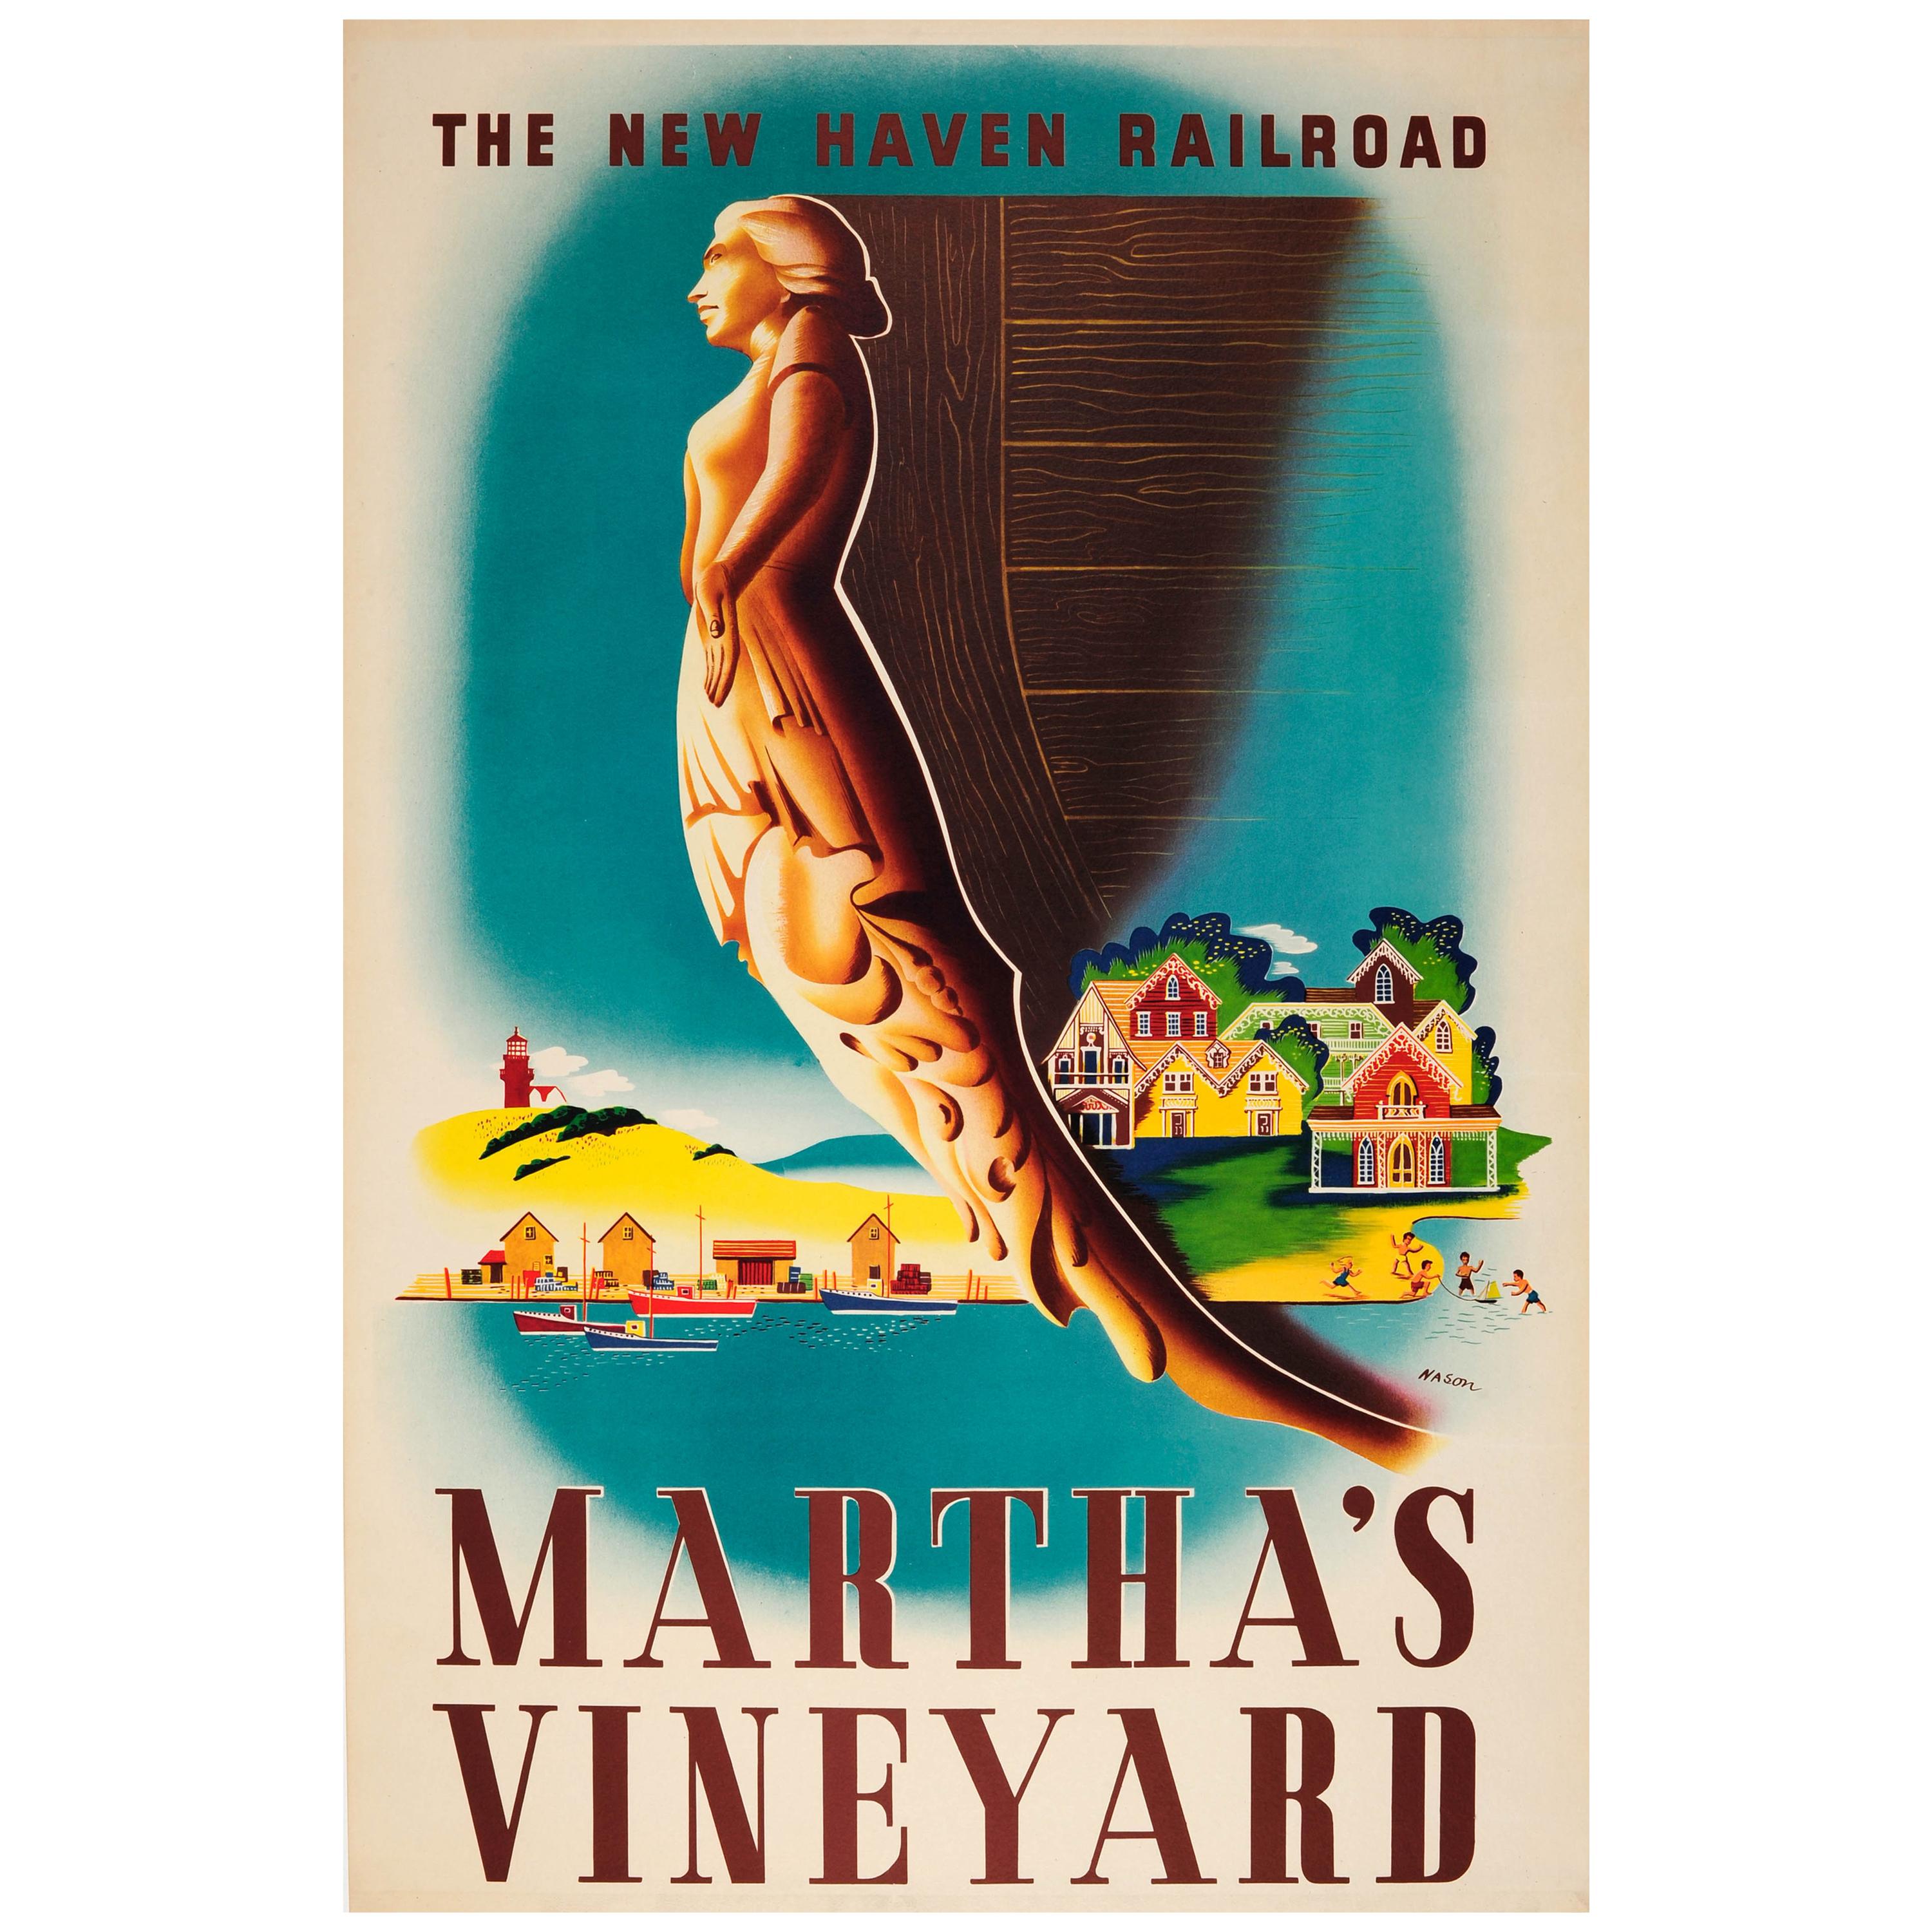 Original Vintage Travel Poster For Martha's Vineyard By The New Haven Railroad